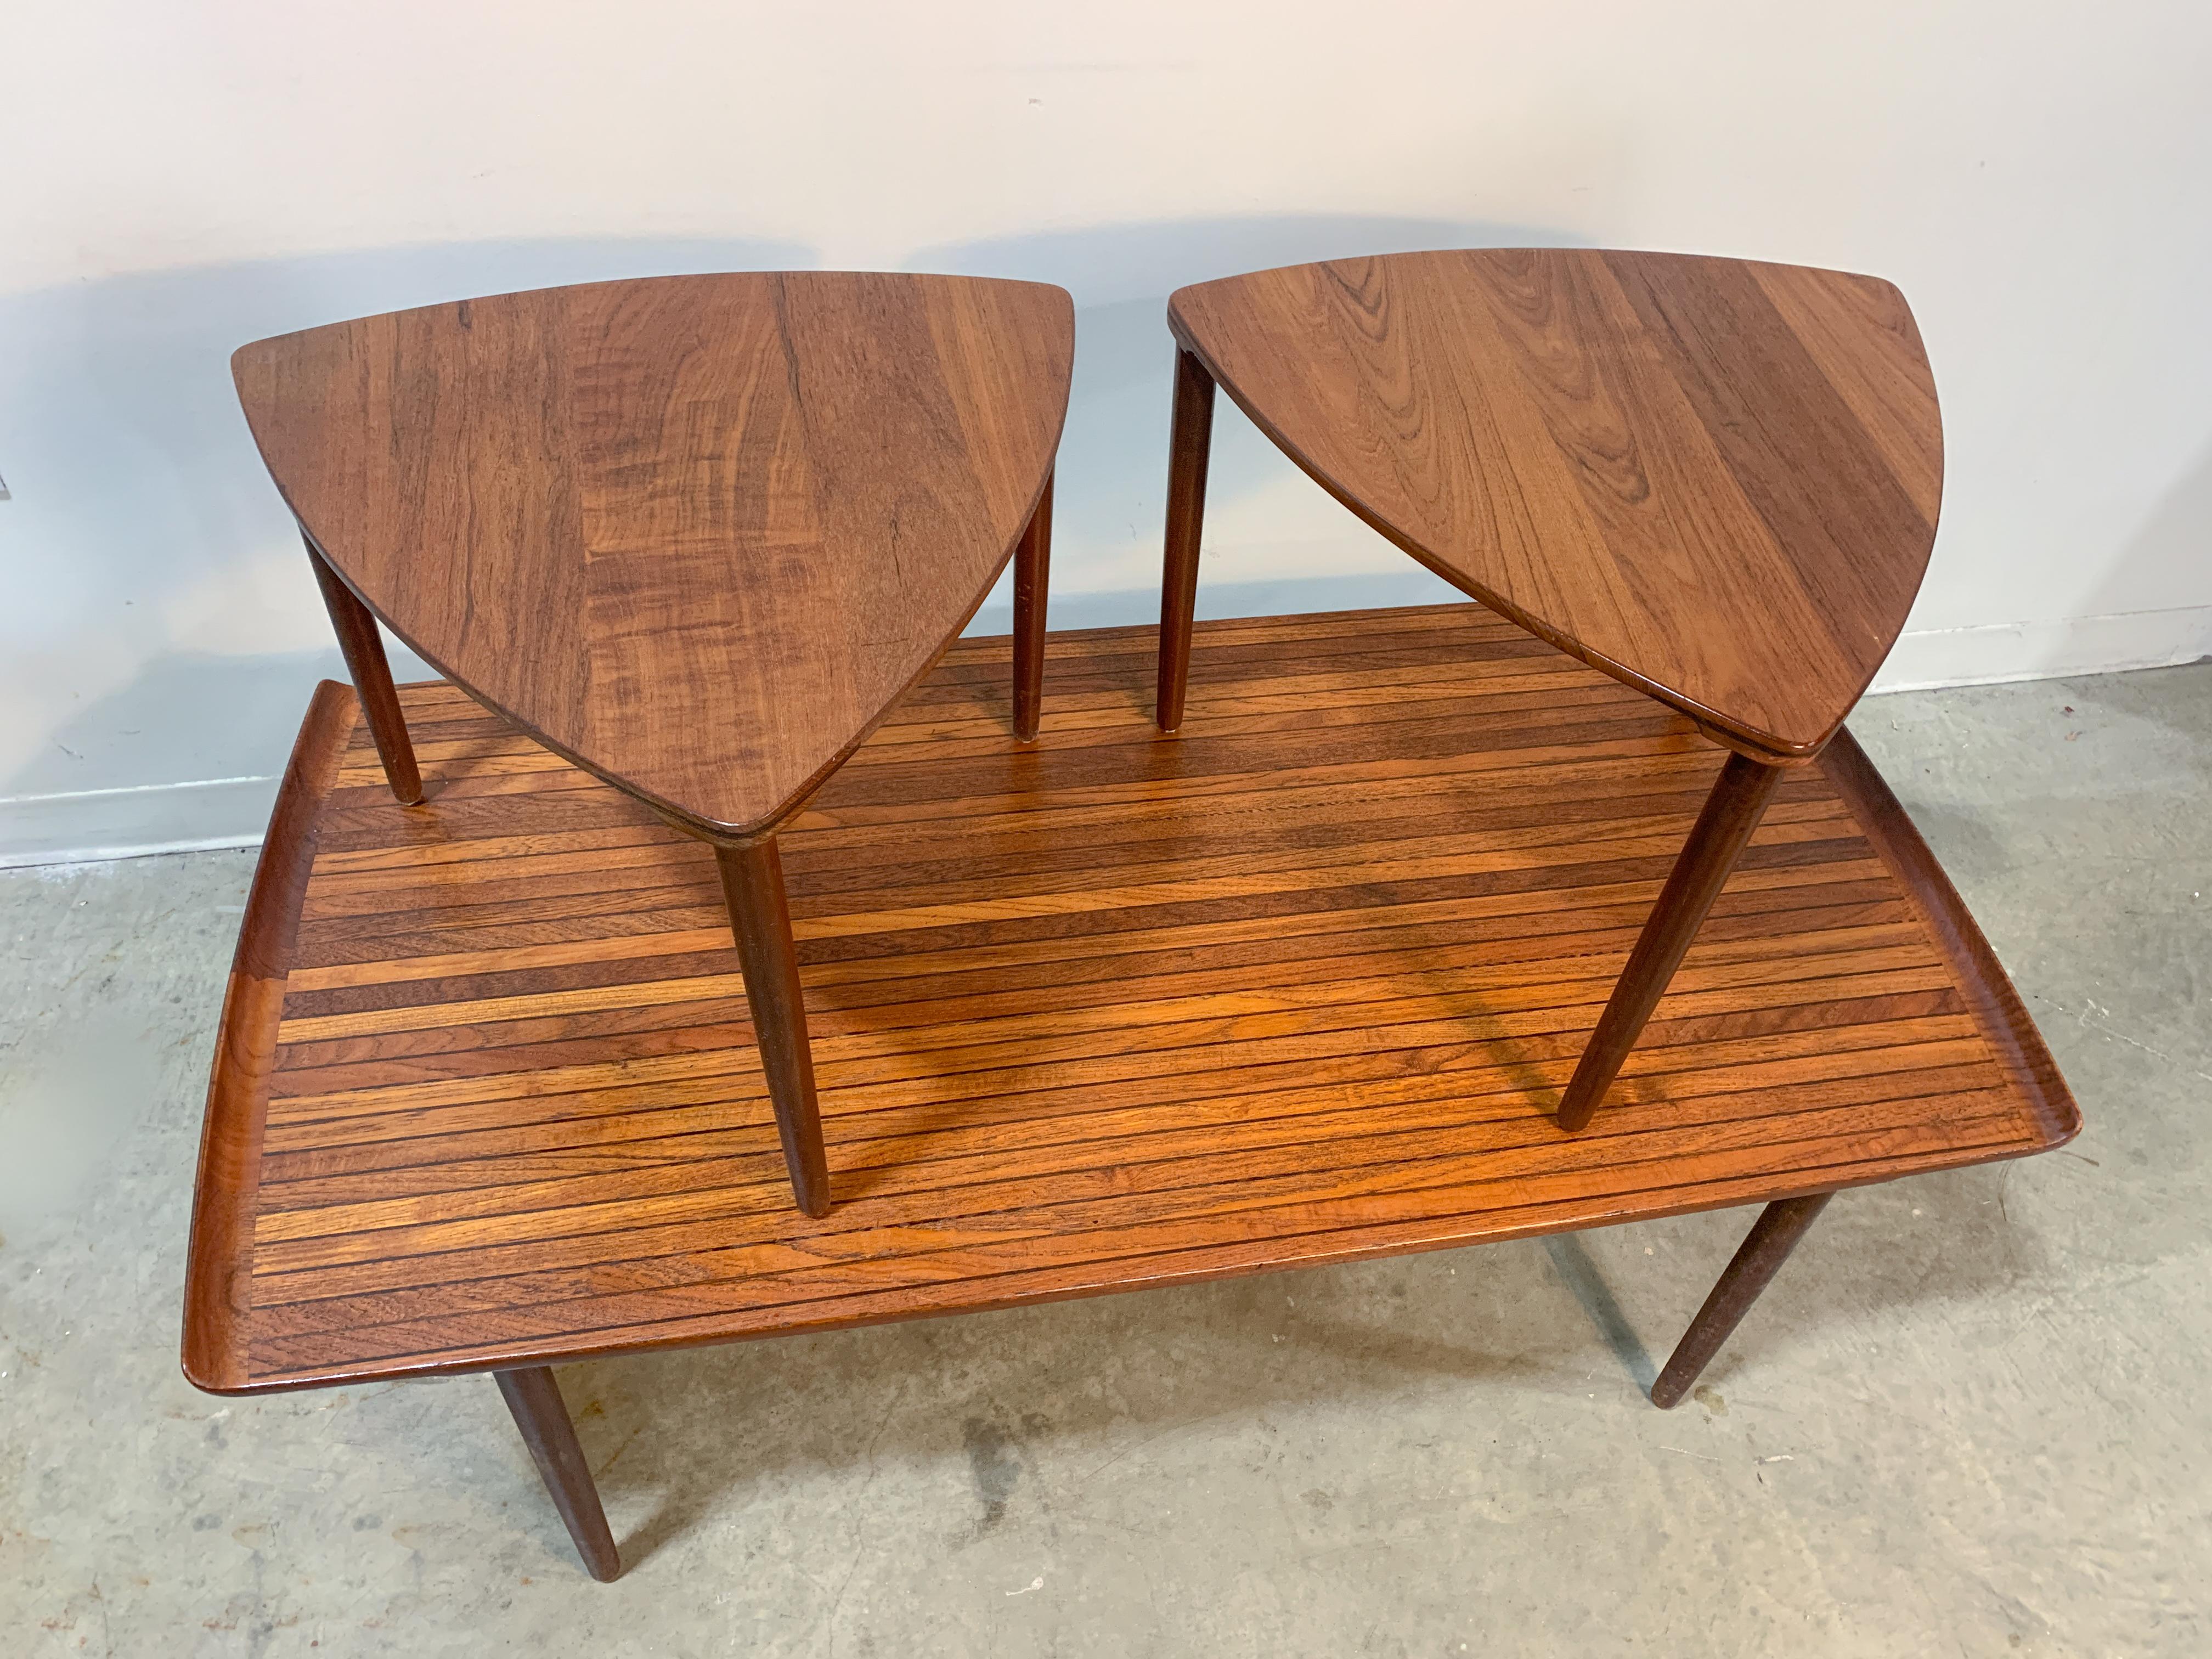 Very rare table set designed by Peter Hvidt and Orla Molgaard-Nielsen for France and Daverkosen in the mid-1950s. Set consists of a solid teak and wenge strip coffee table with a pair of solid teak triangular satellite tables that 'dock' underneath,